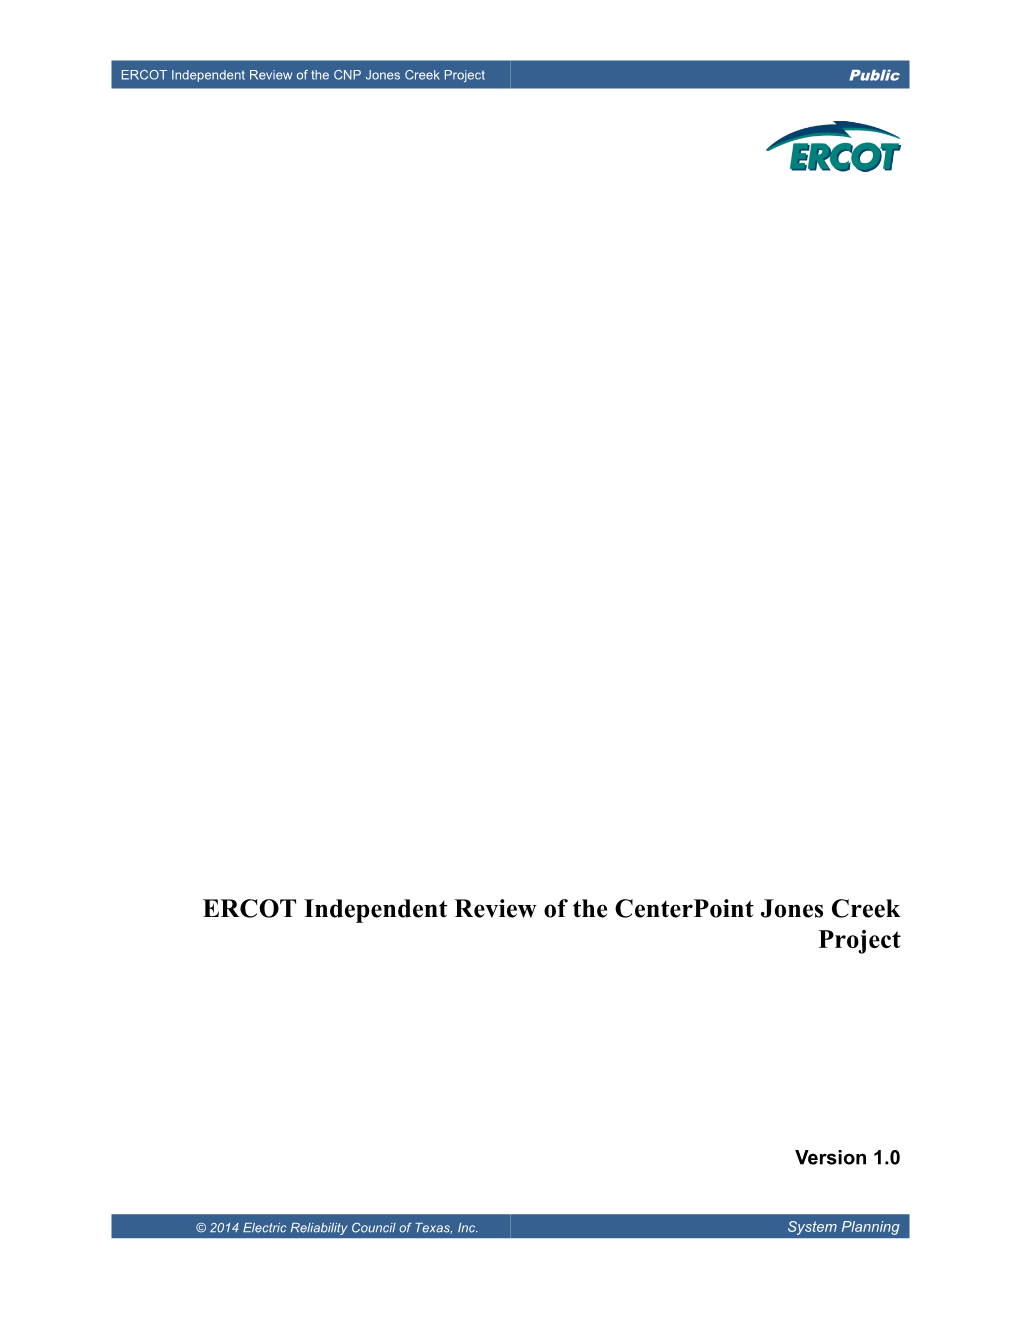 ERCOT Independent Review of the Centerpoint Jones Creek Project